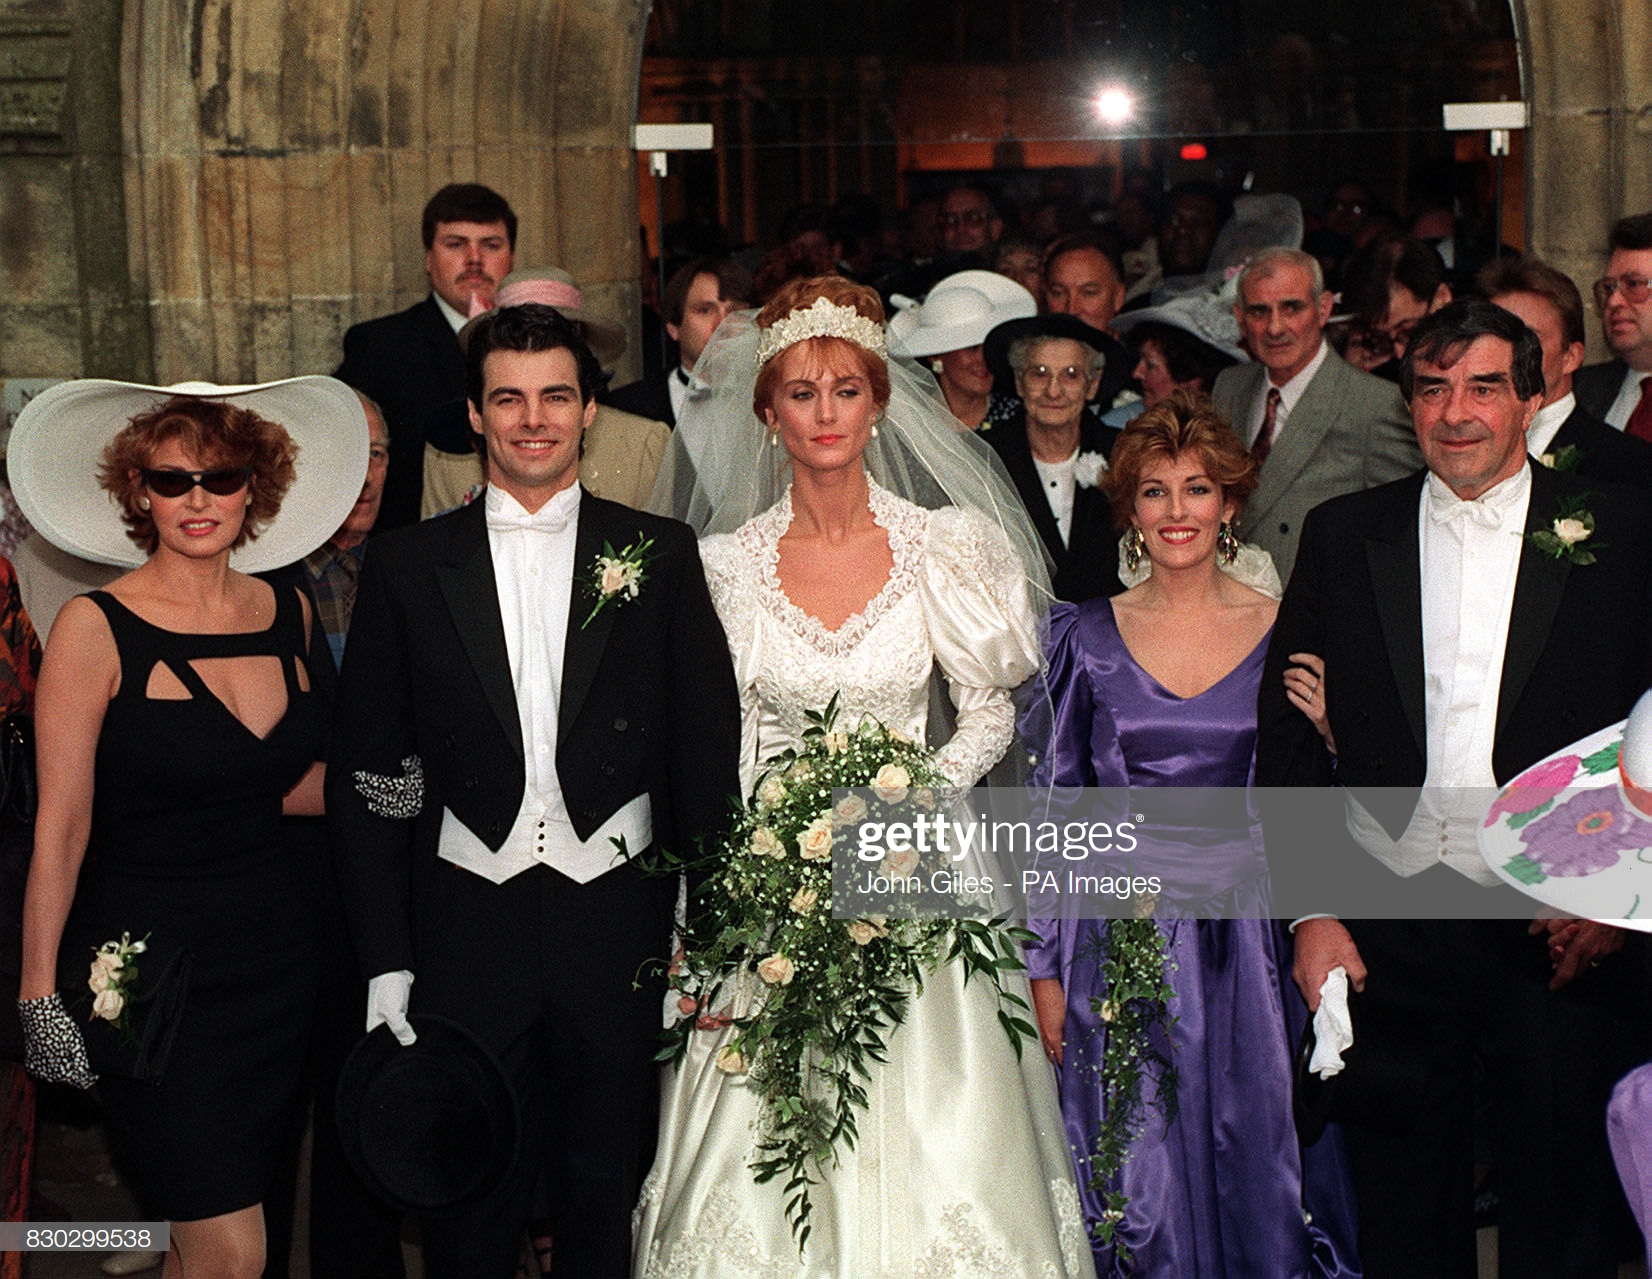 Bride Rebecca Trueman with her husband Damon, his mother Raquel Welch, the bride's father Fred Truman, and sister Karen, at Bolton Abbey. *According to a report Karen Trueman has split up with her husband John after discovering that he was having an affair with her best friend. (Photo by John Giles - PA Images/PA Images via Getty Images)